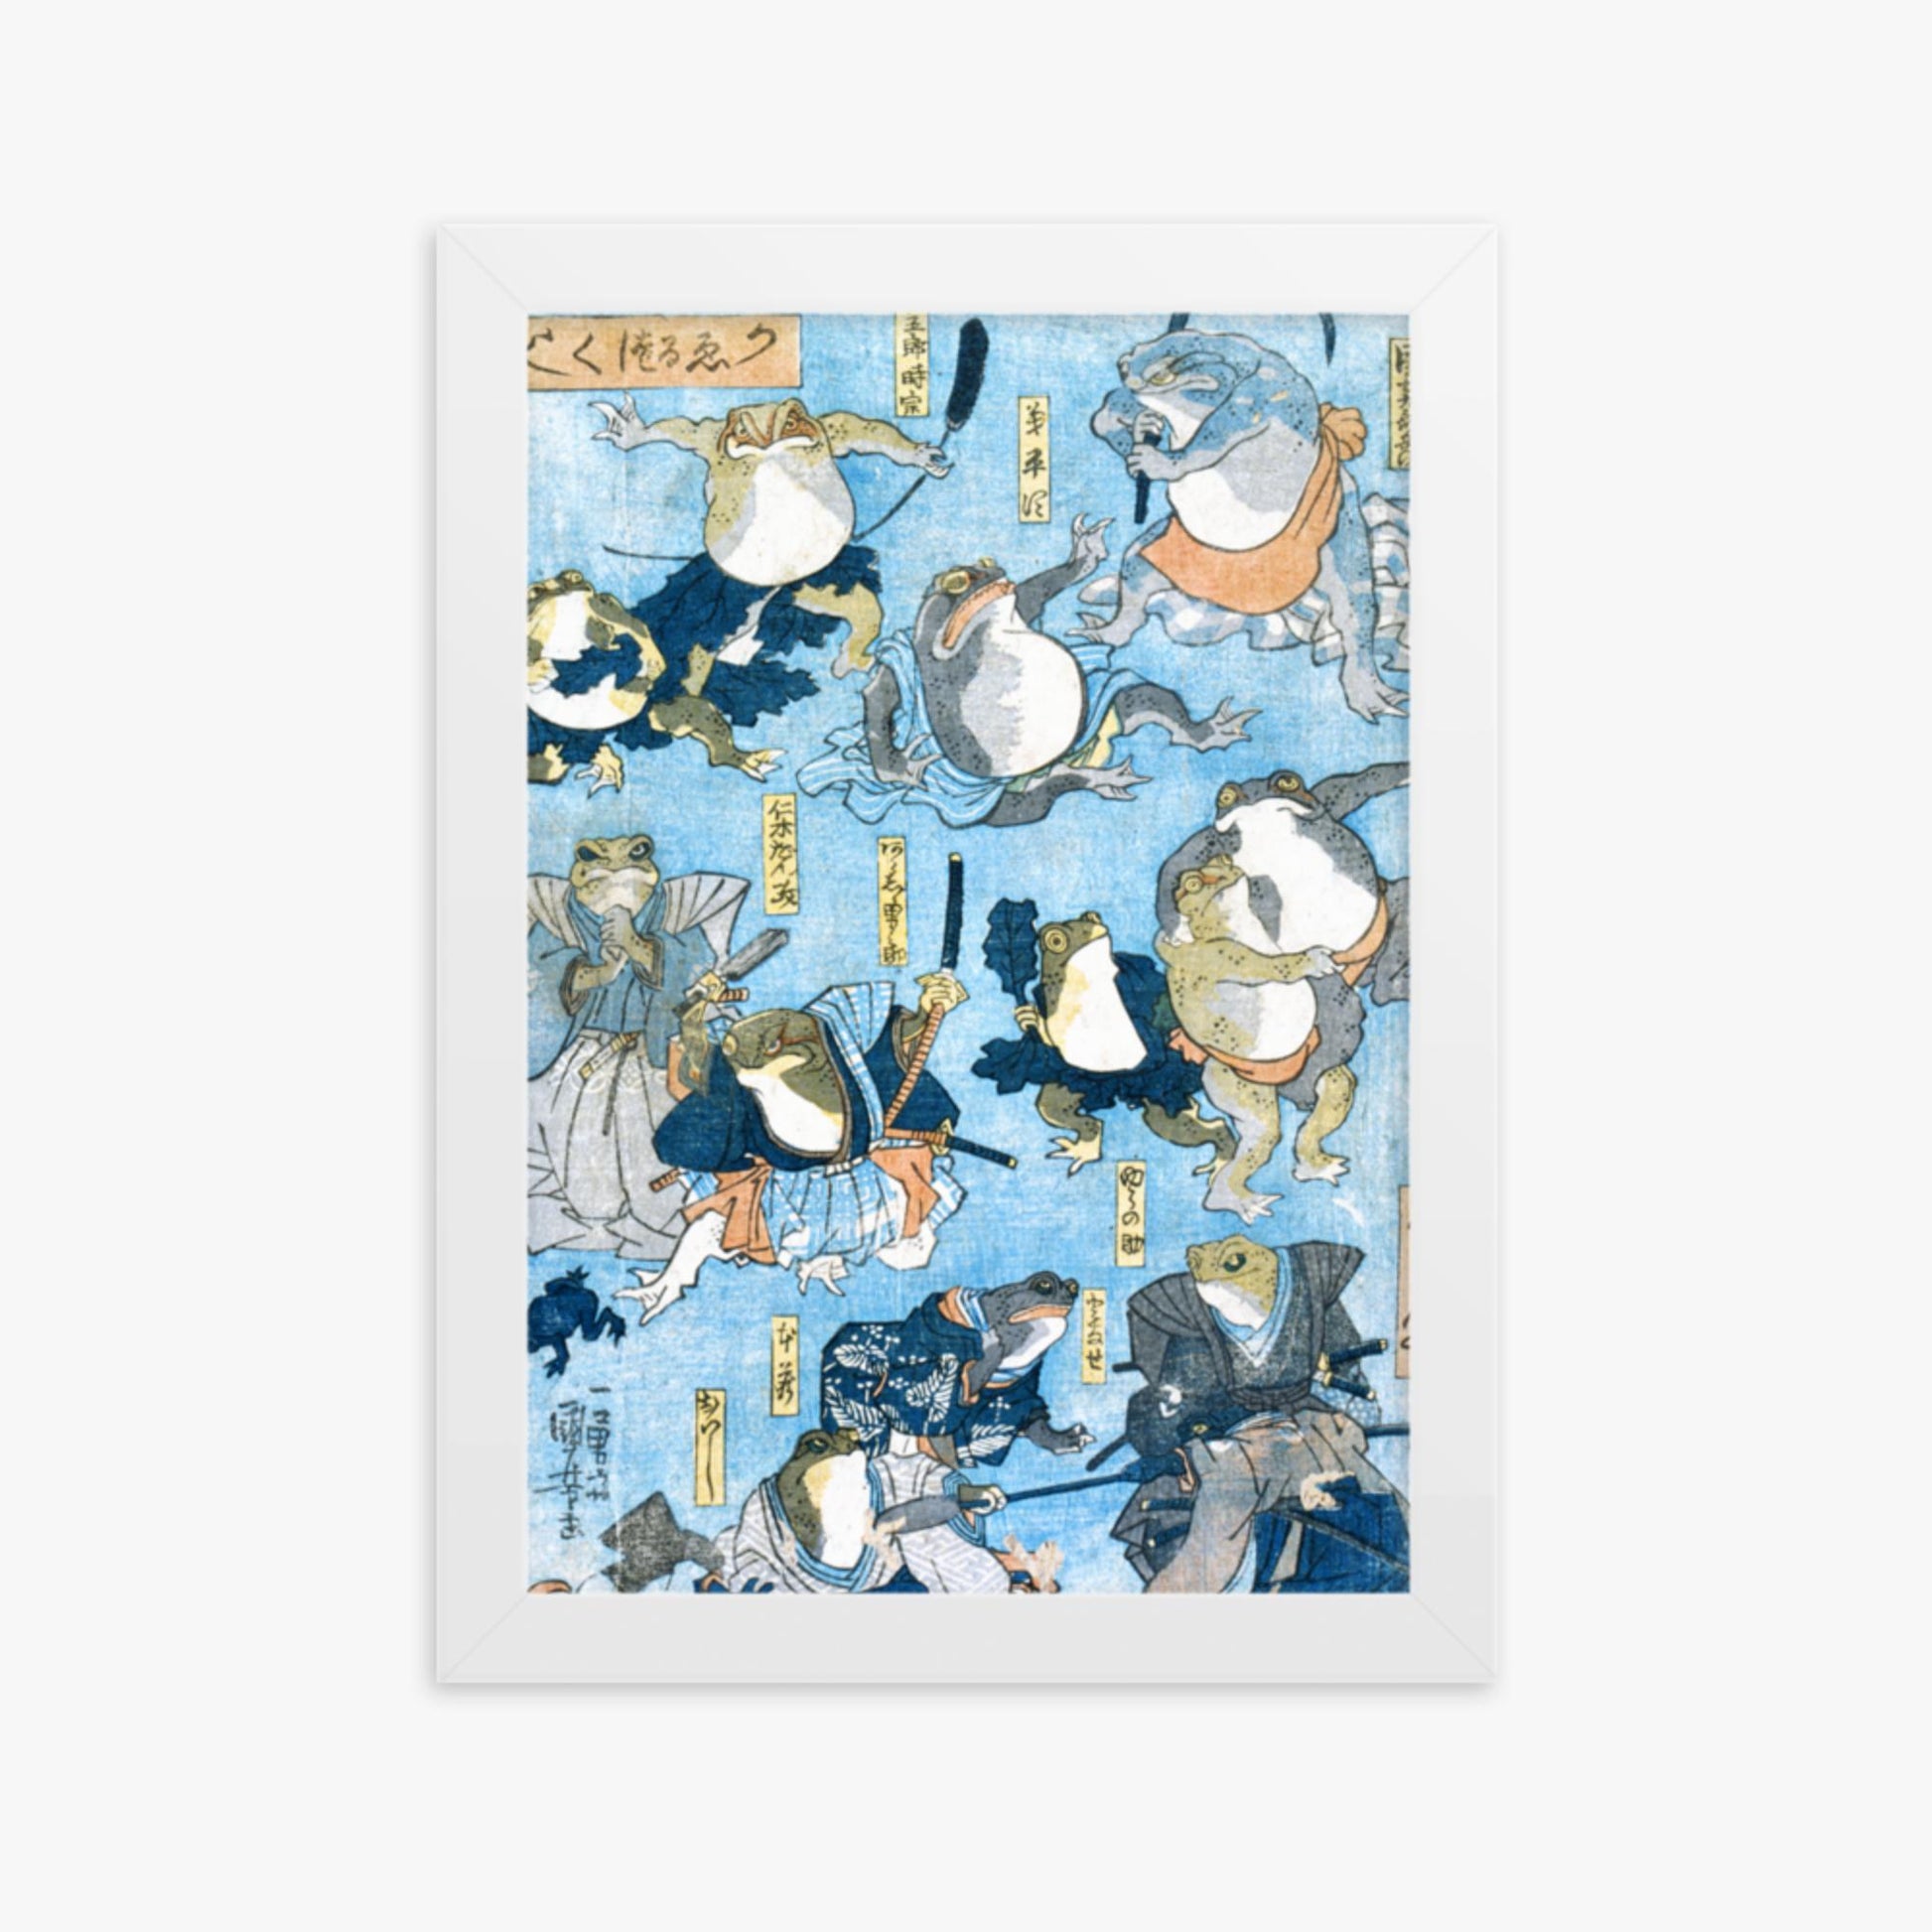 Utagawa Kuniyoshi - Famous Heroes of the Kabuki Stage Played by Frogs  21x30 cm Poster With White Frame